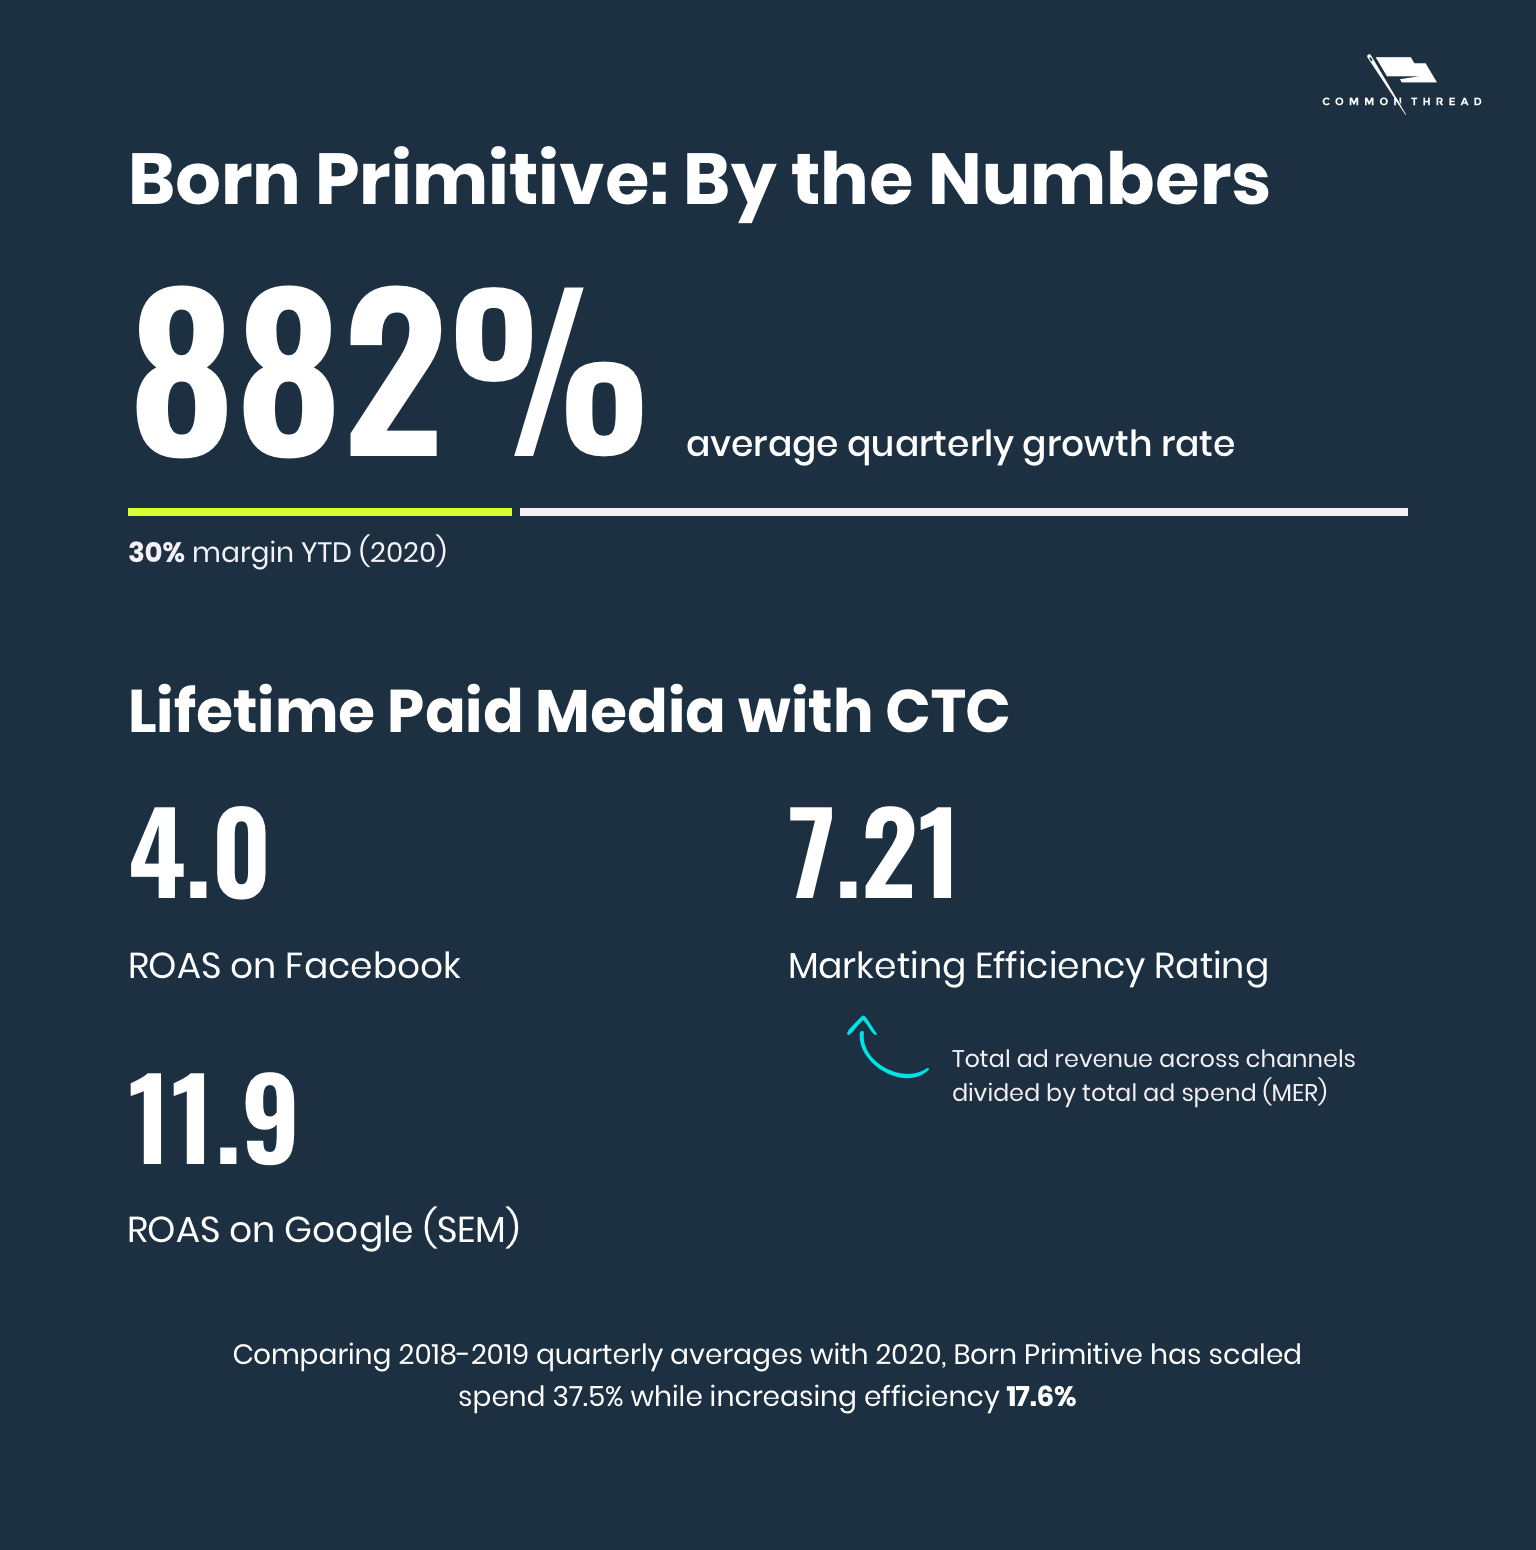 Born Primitive Case Study By the Numbers